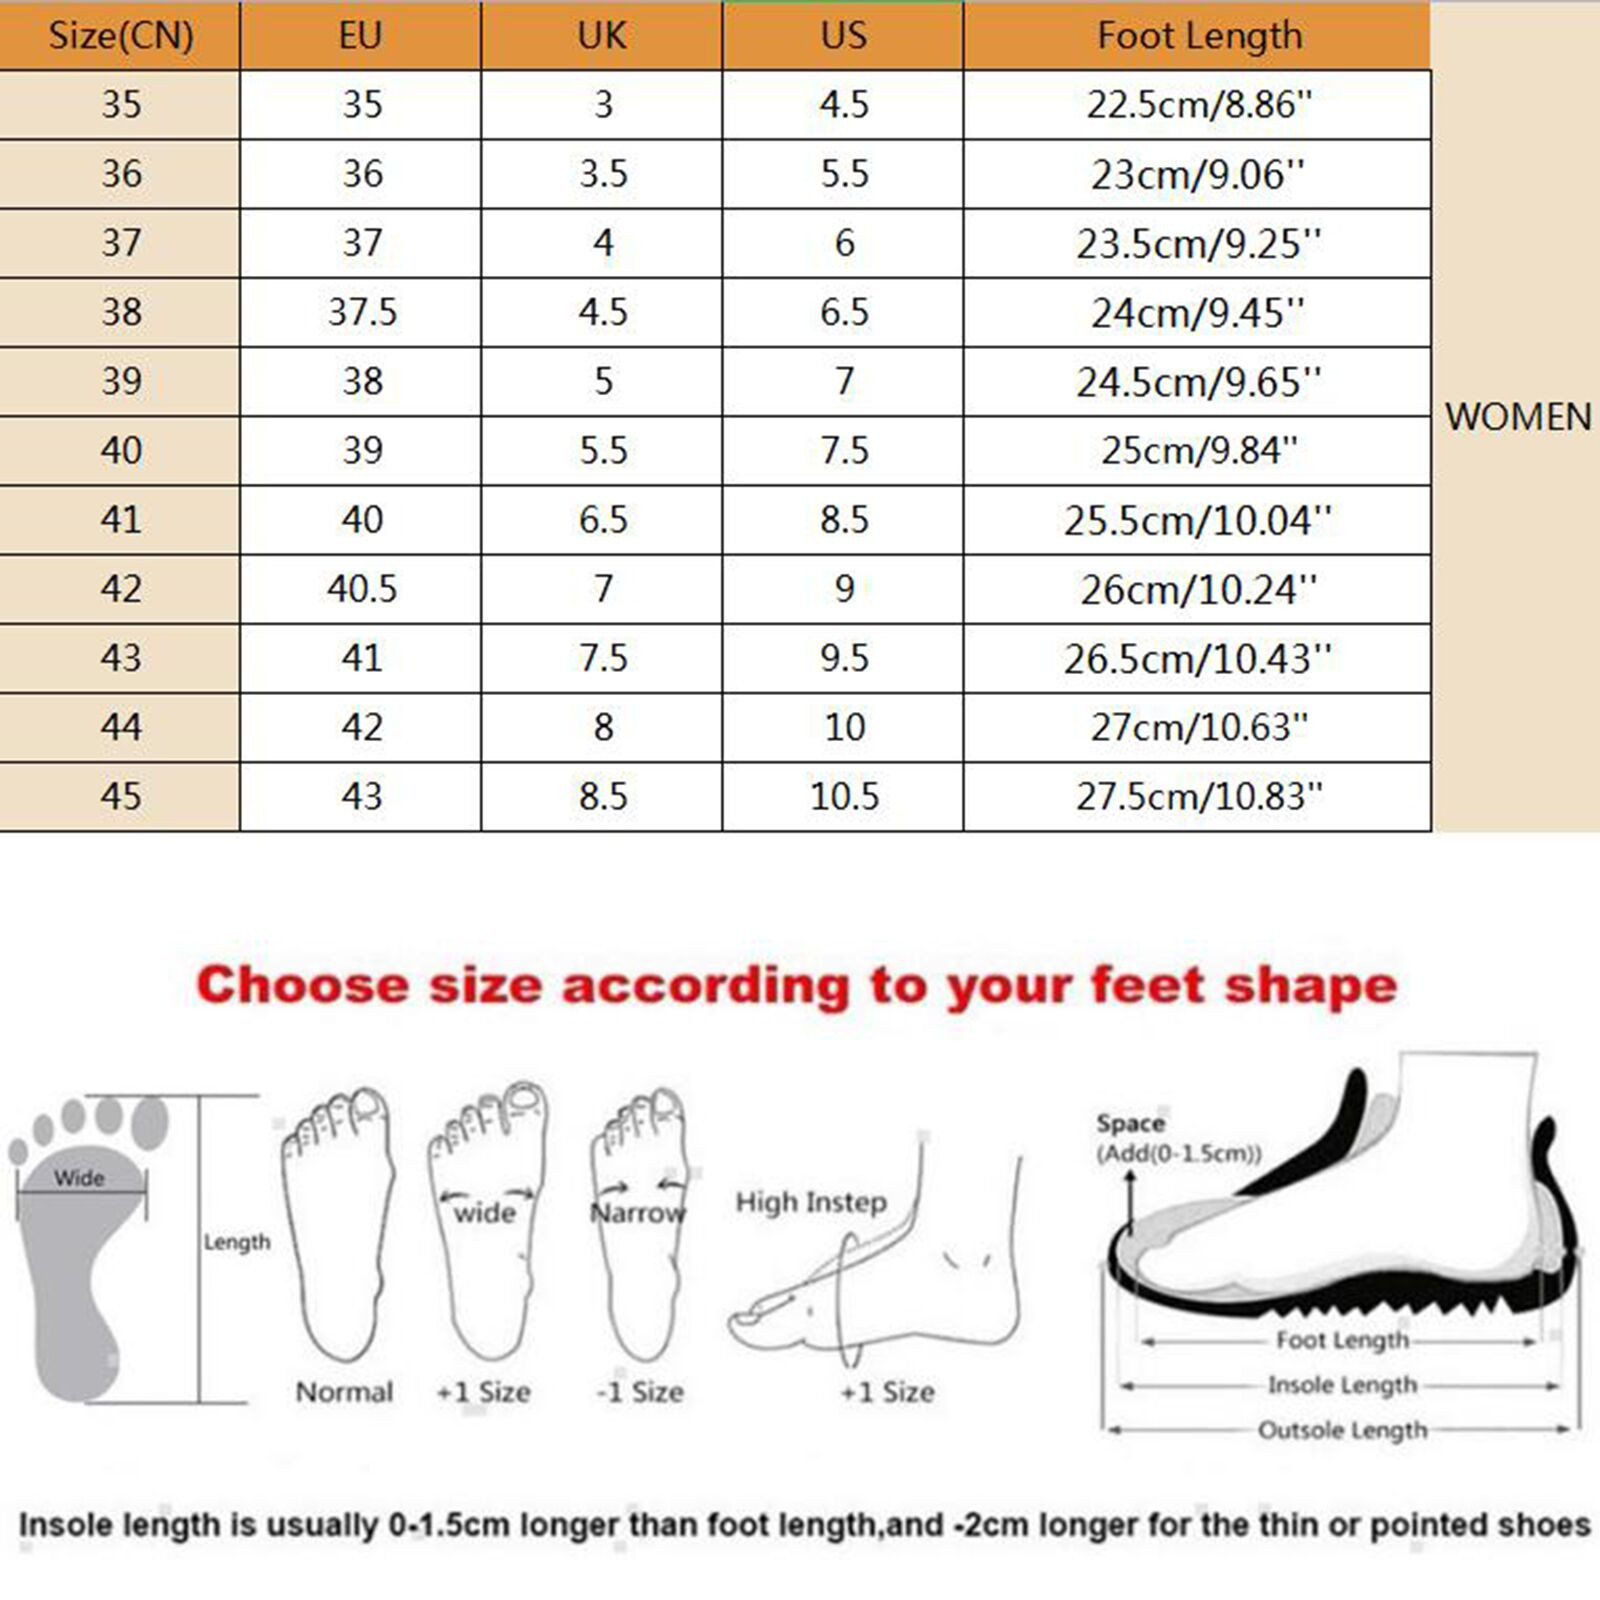 Orthopedic Sandals for Women Clearance Closed Toe Soft Wide Fit Sandal ...